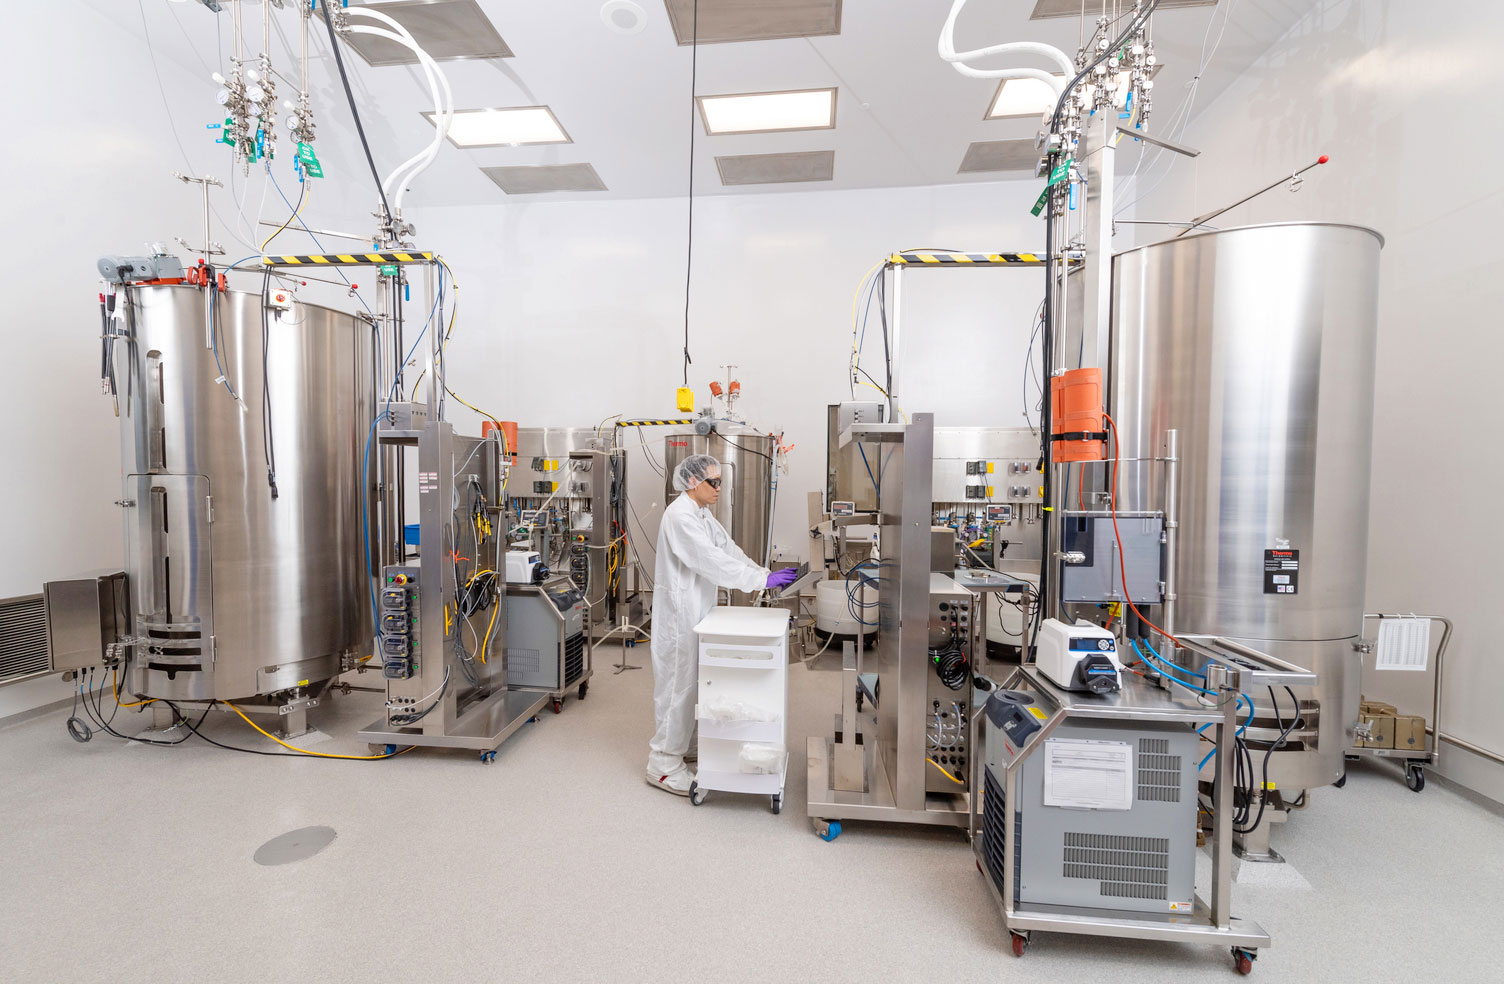 Catalent Biologics’ state-of-the-art facility in Madison, WI